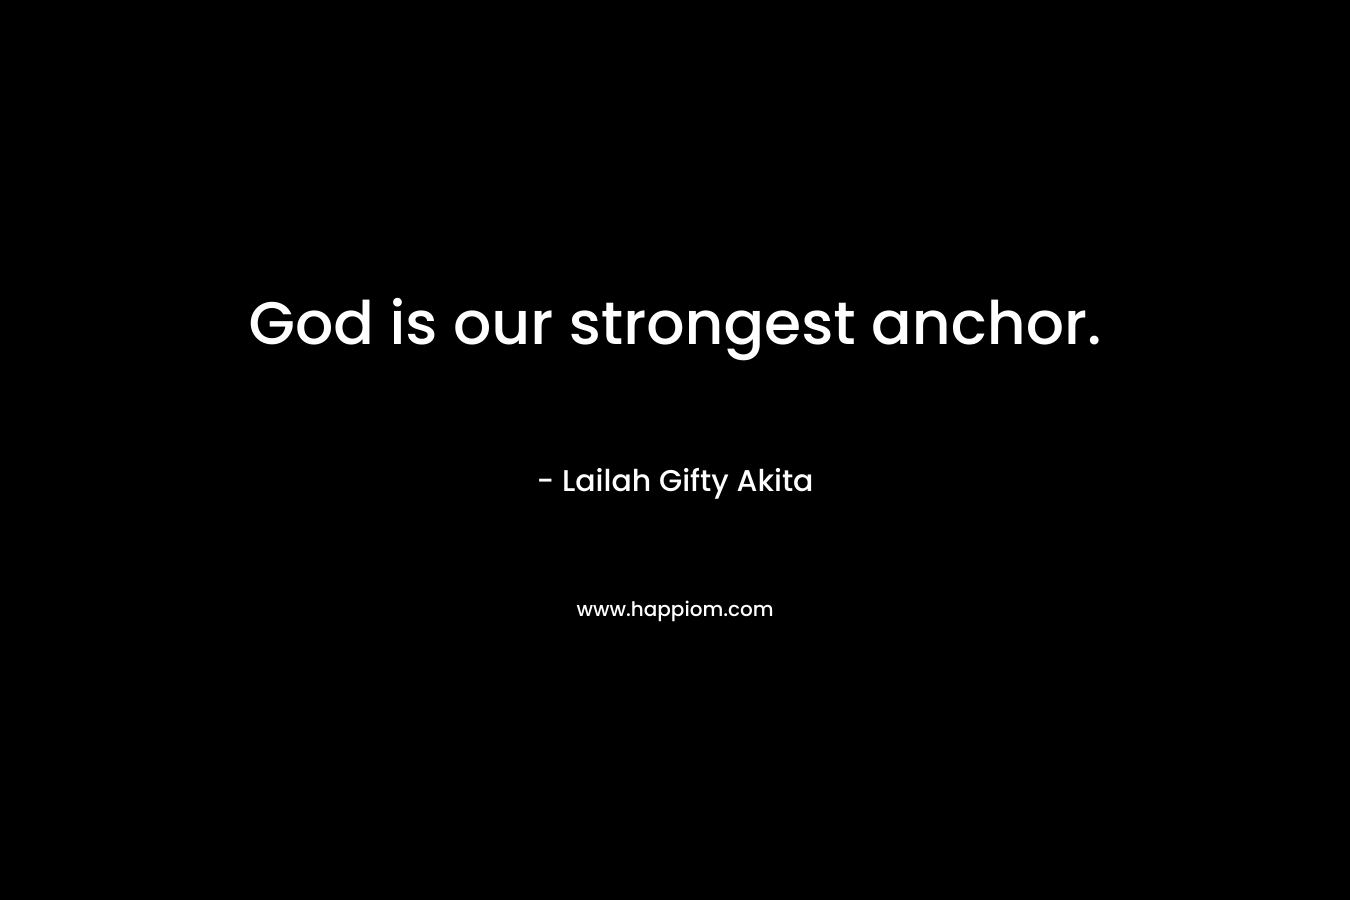 God is our strongest anchor.